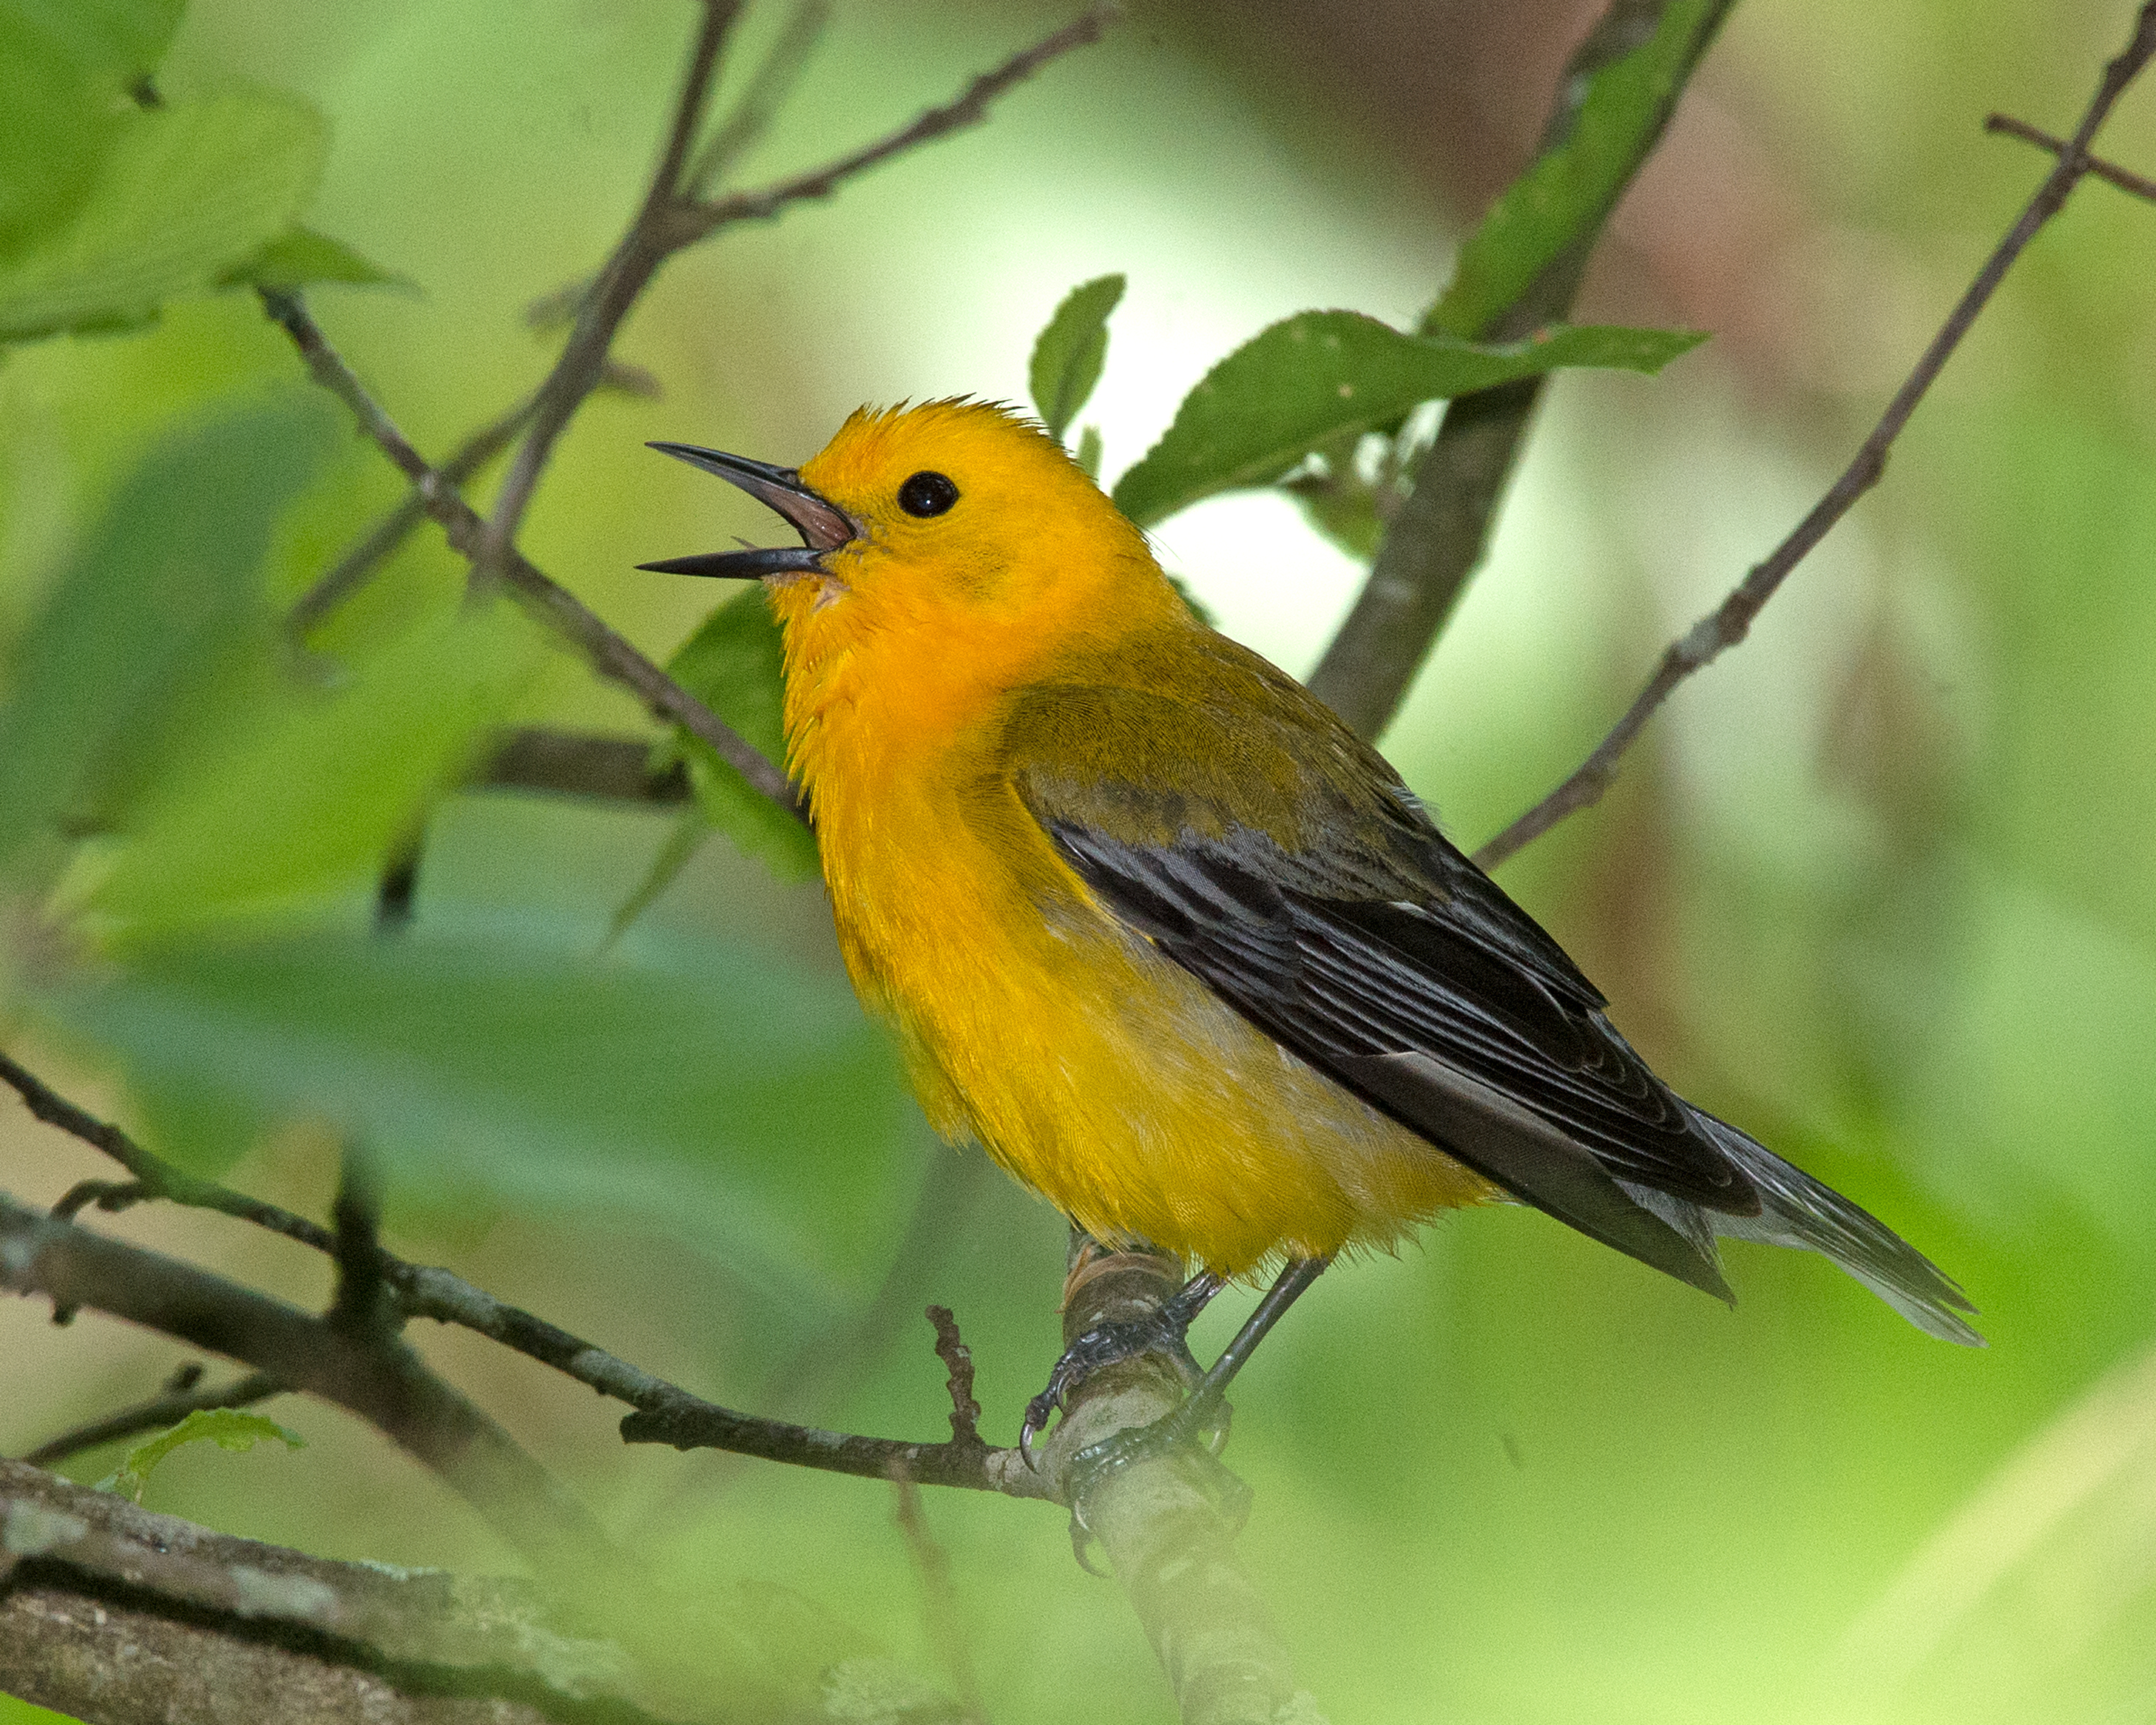 A Prothonotary Warbler singing at Occoquan Bay NWR.